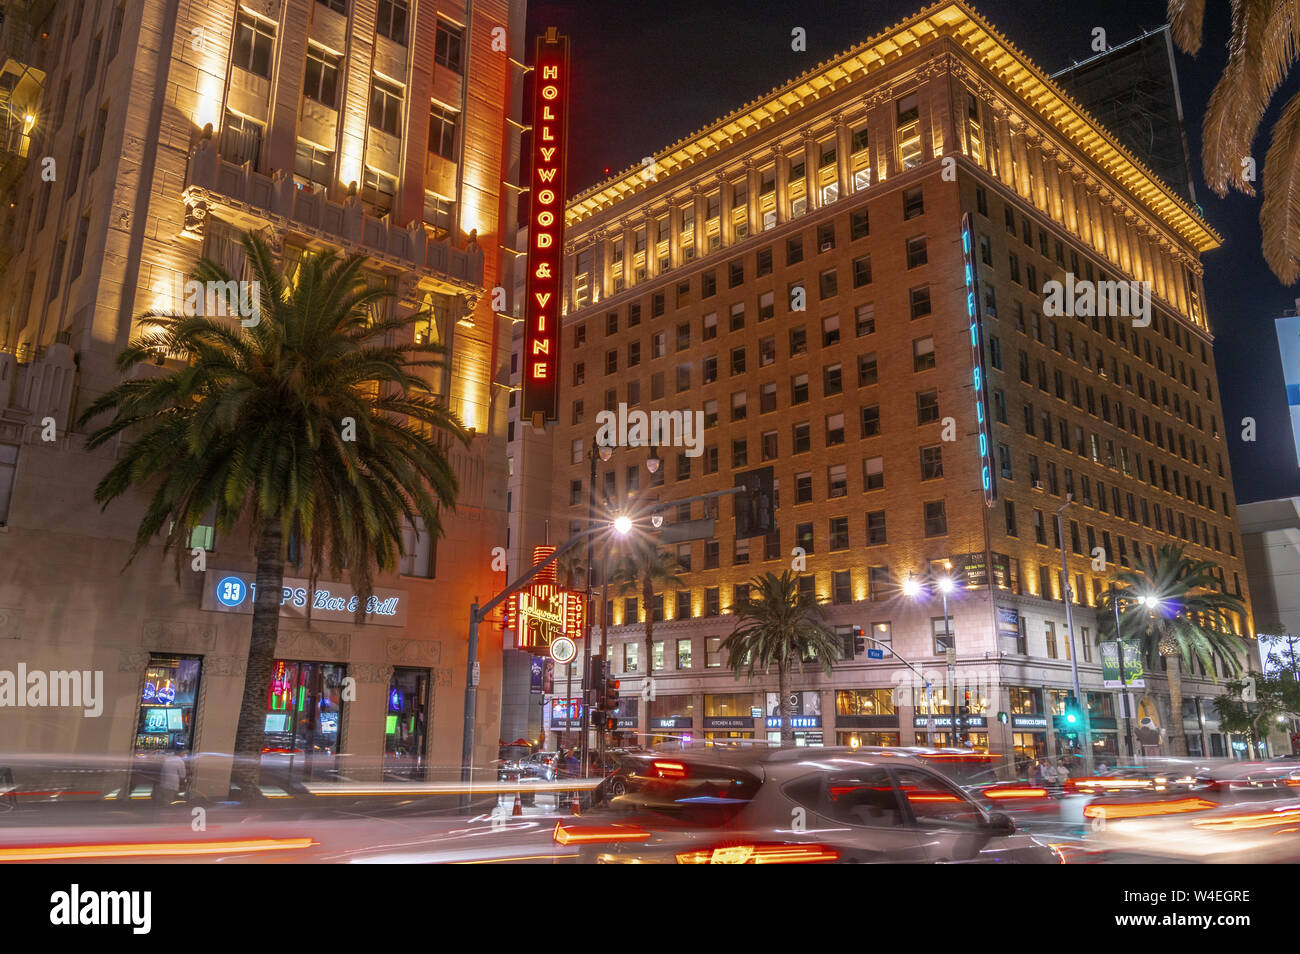 Night scene at the Hollywood Boulevard and Vine Street intersection in ...